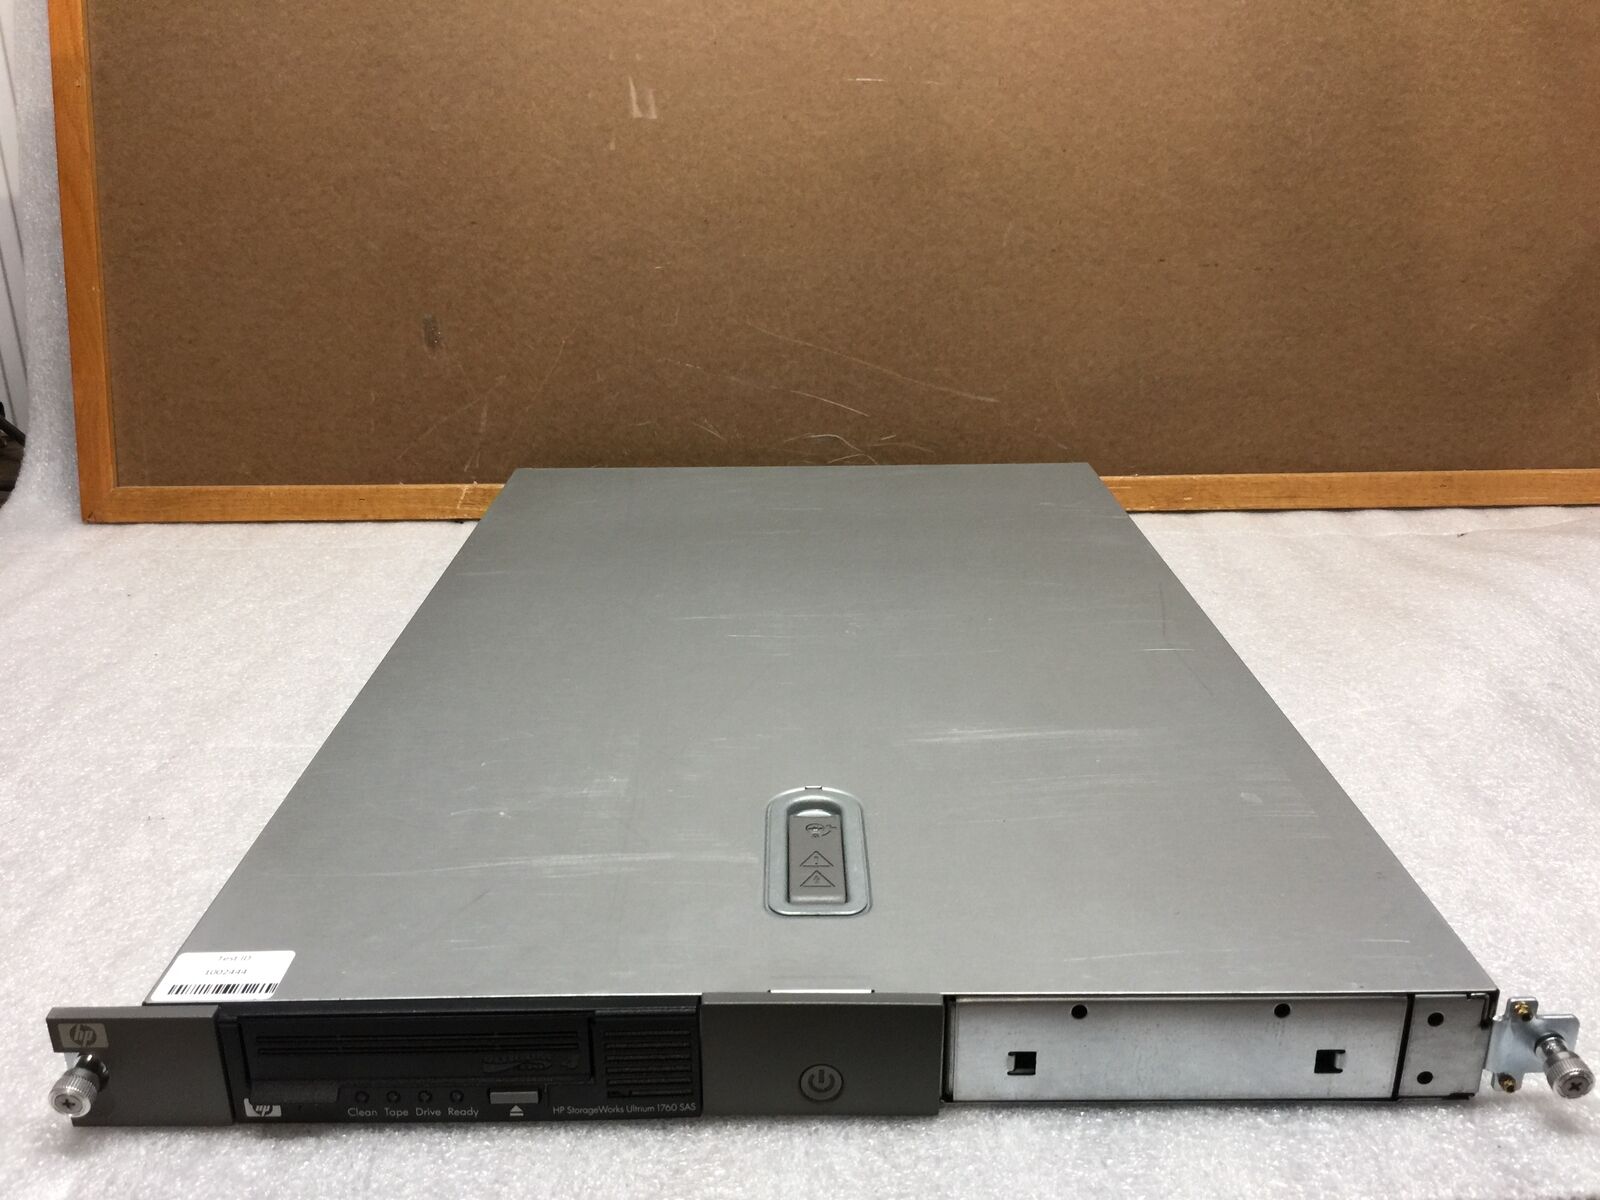 HP Storage Works Ultrium 1760 SAS, 1U Rack Mount Chassis, Tested and Working